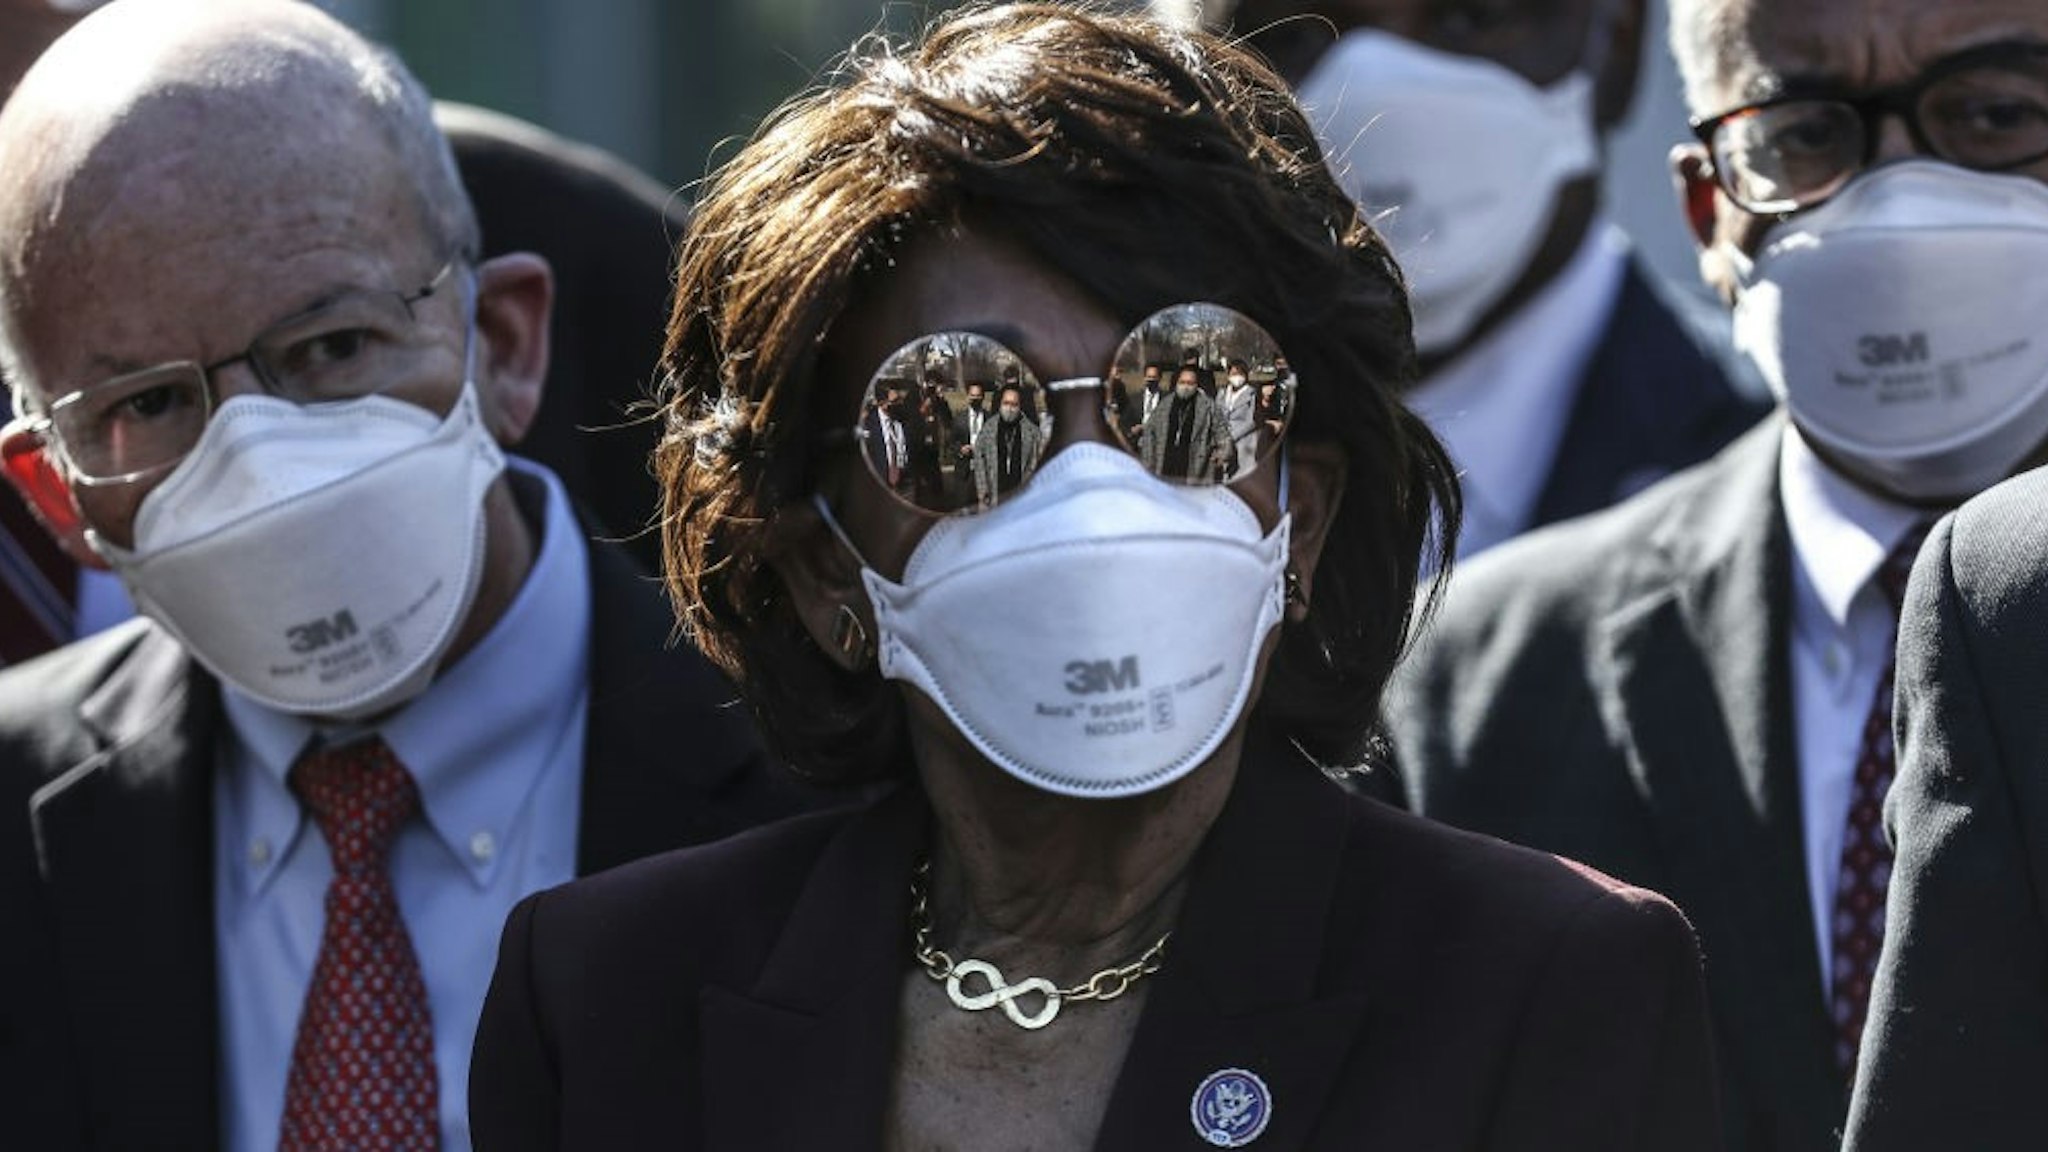 Representative Maxine Waters, a Democrat from California, wears sunglasses and a protective mask during a press conference outside the White House following a meeting with U.S. President Joe Biden in Washington, D.C., U.S., on Friday, Feb. 5, 2021. The Senate voted 51-50 to adopt a budget blueprint for Biden's $1.9 trillion virus relief package following nearly 15 hours of wading through amendments from both parties. Photographer: